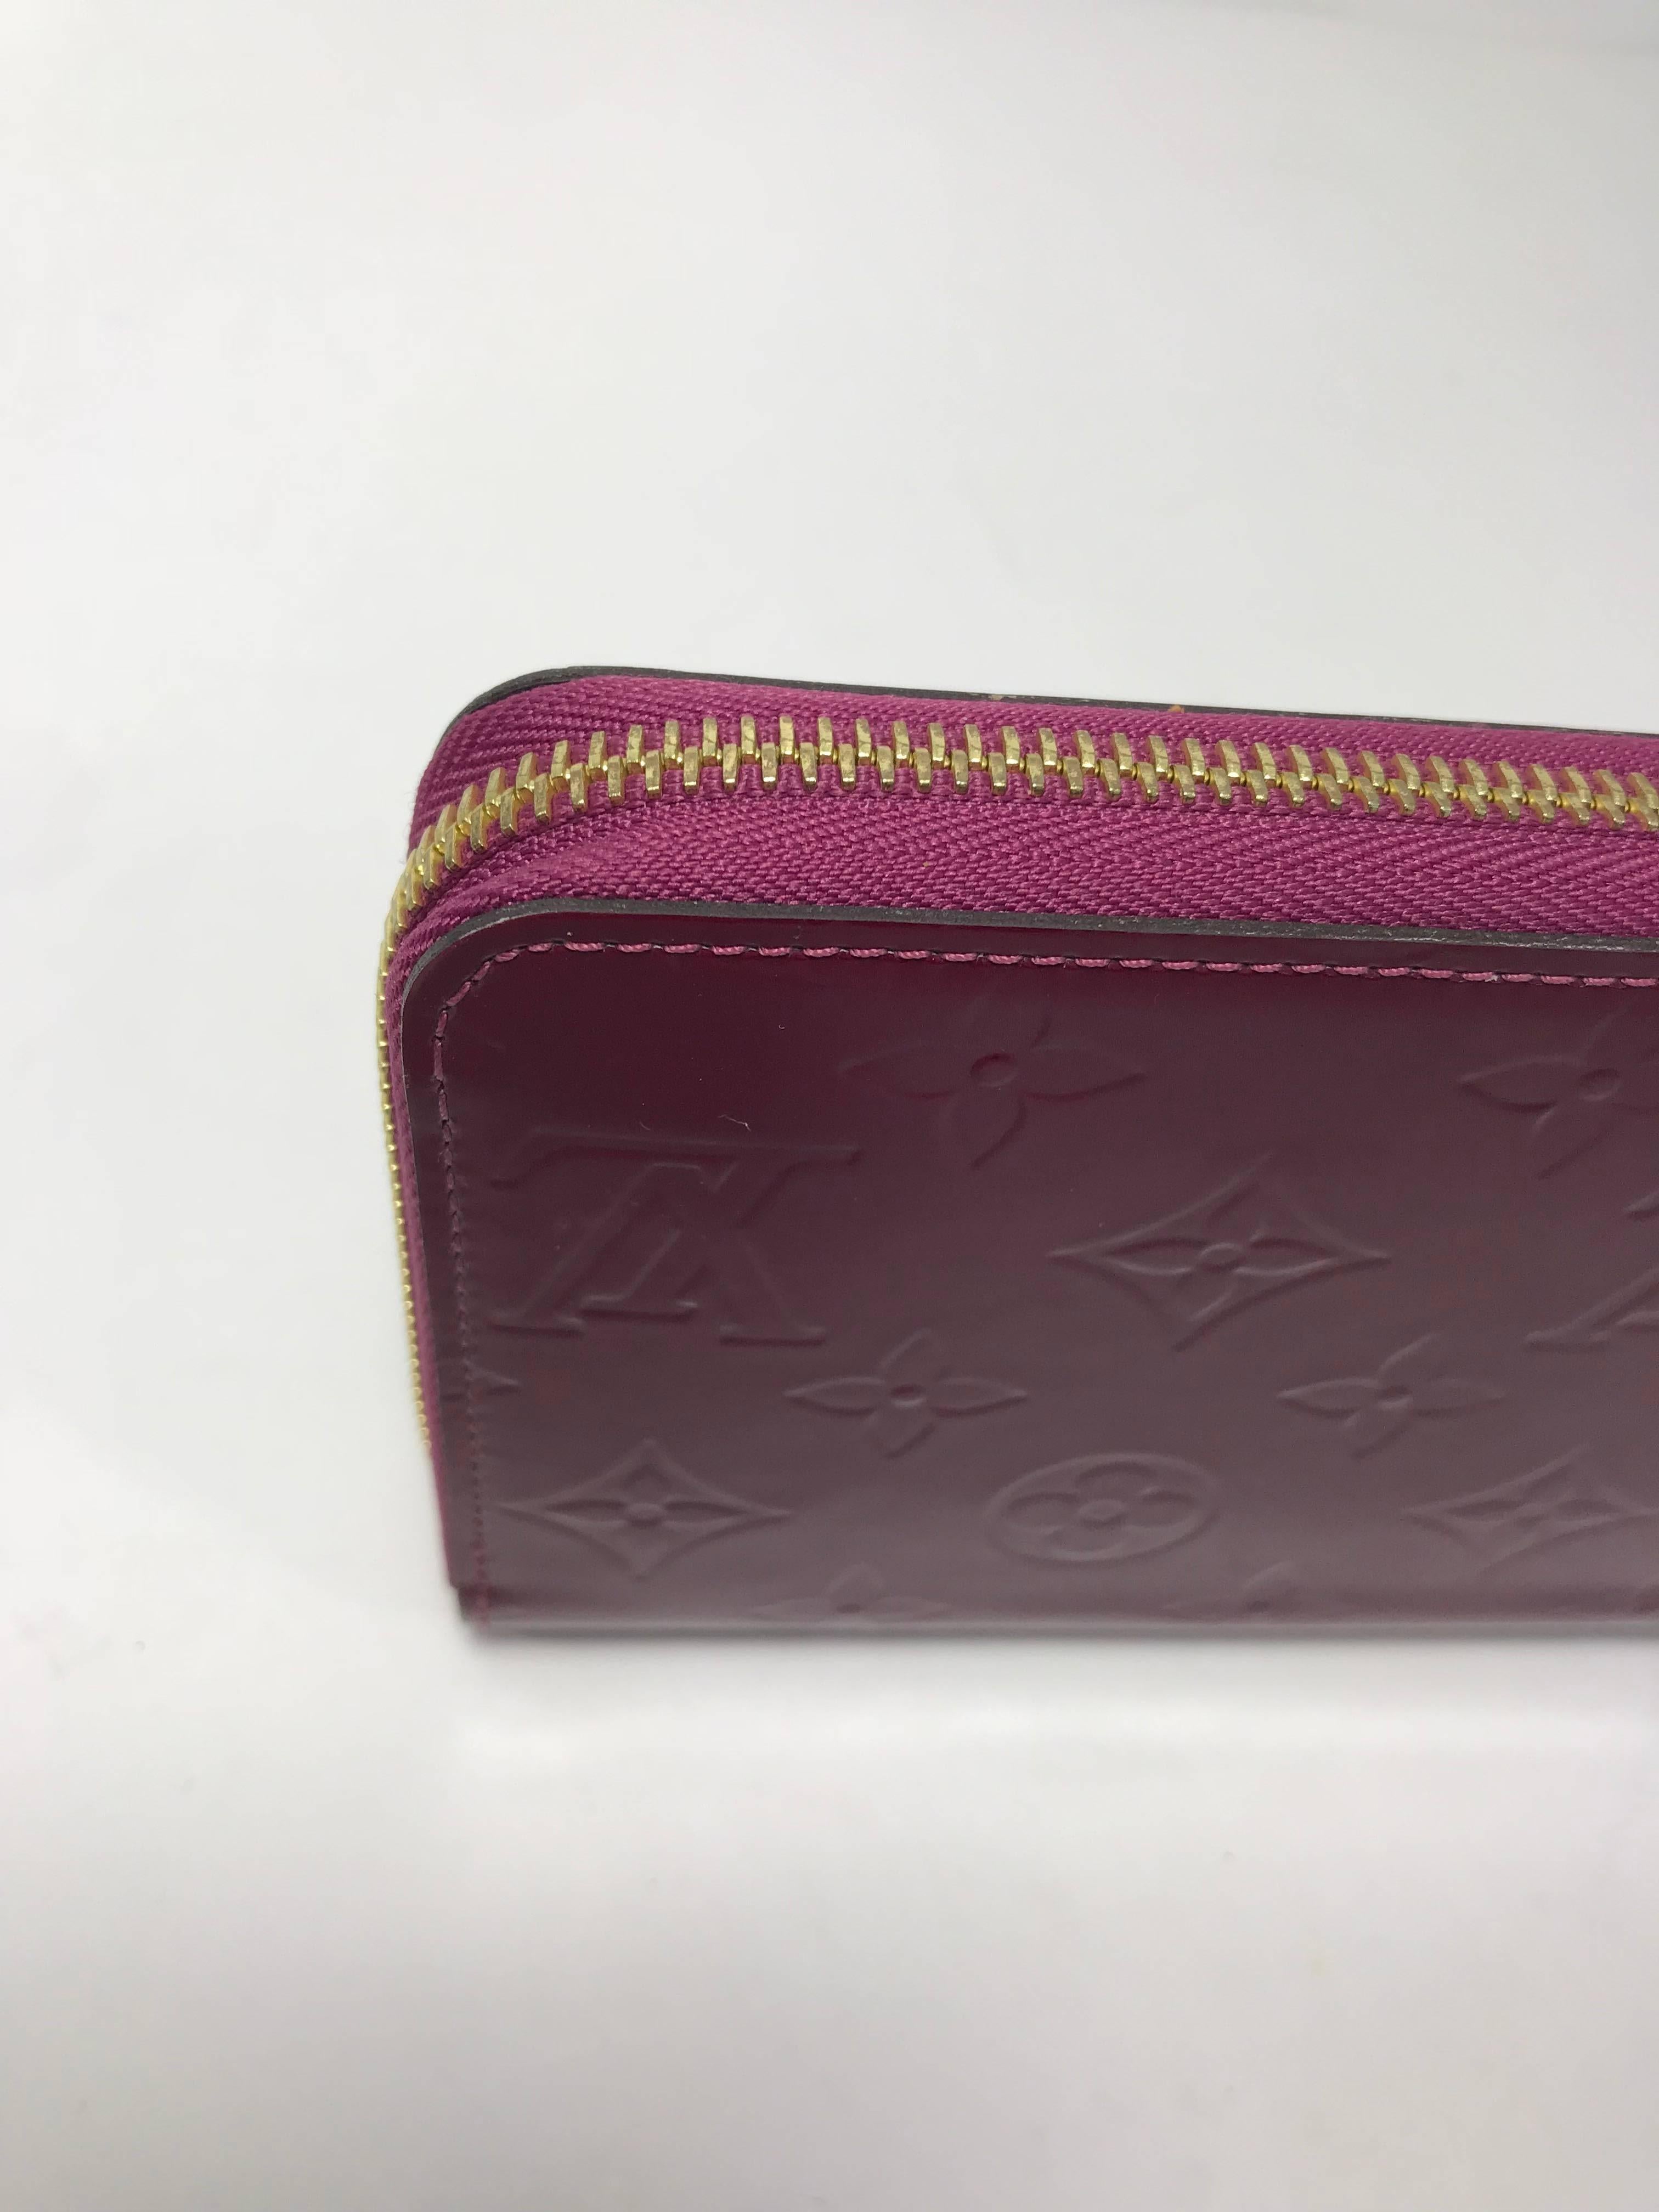  Louis Vuitton Vernis Zippy Wallet in Rouge Fauviste In New Condition For Sale In Saint Charles, IL